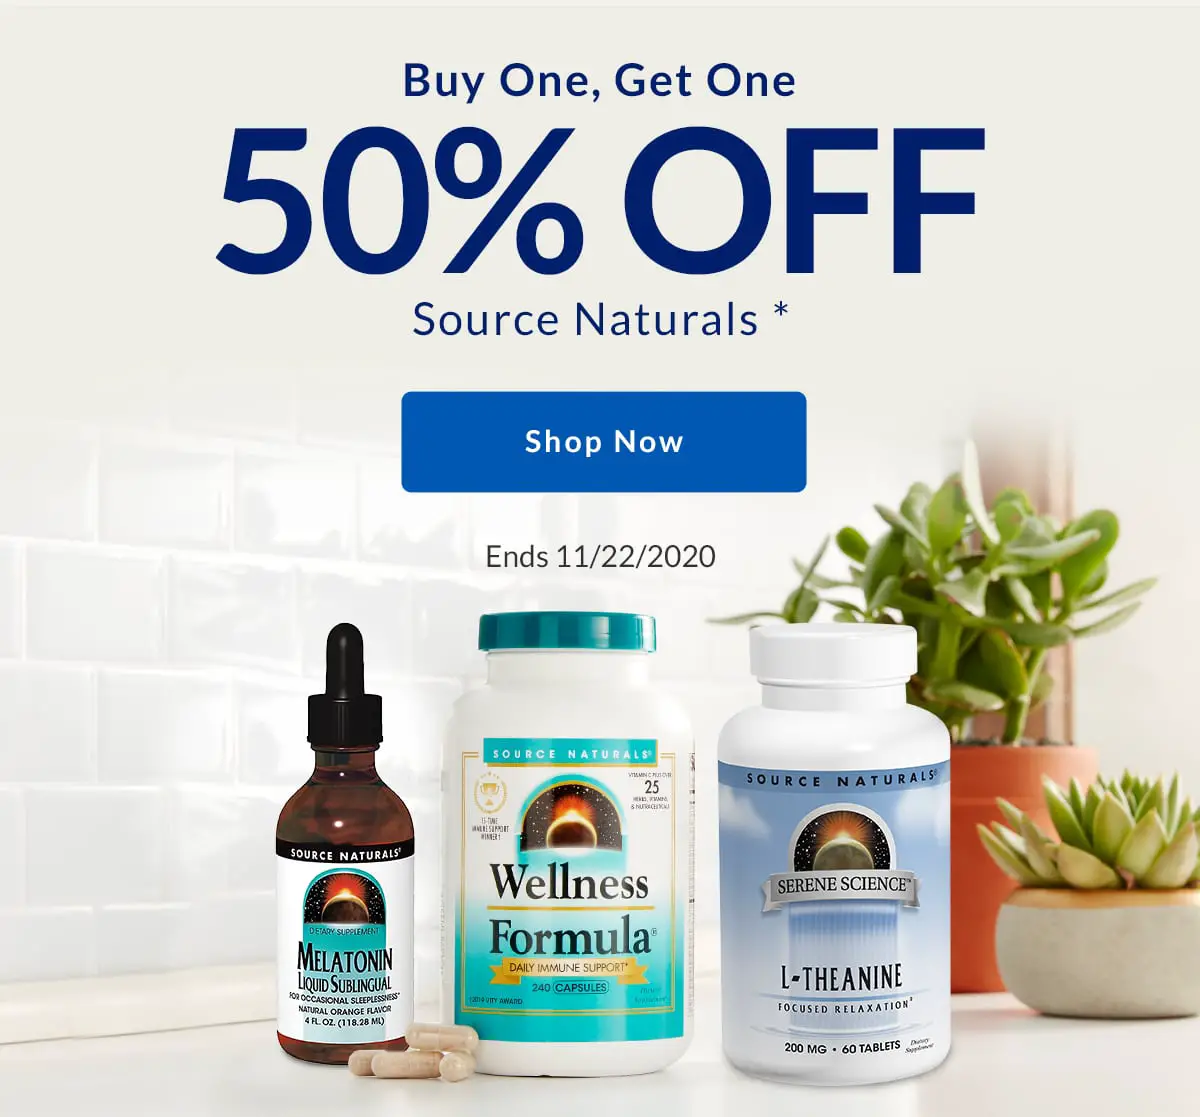 Vitamin Shoppe: Stress less with this $30 coupon